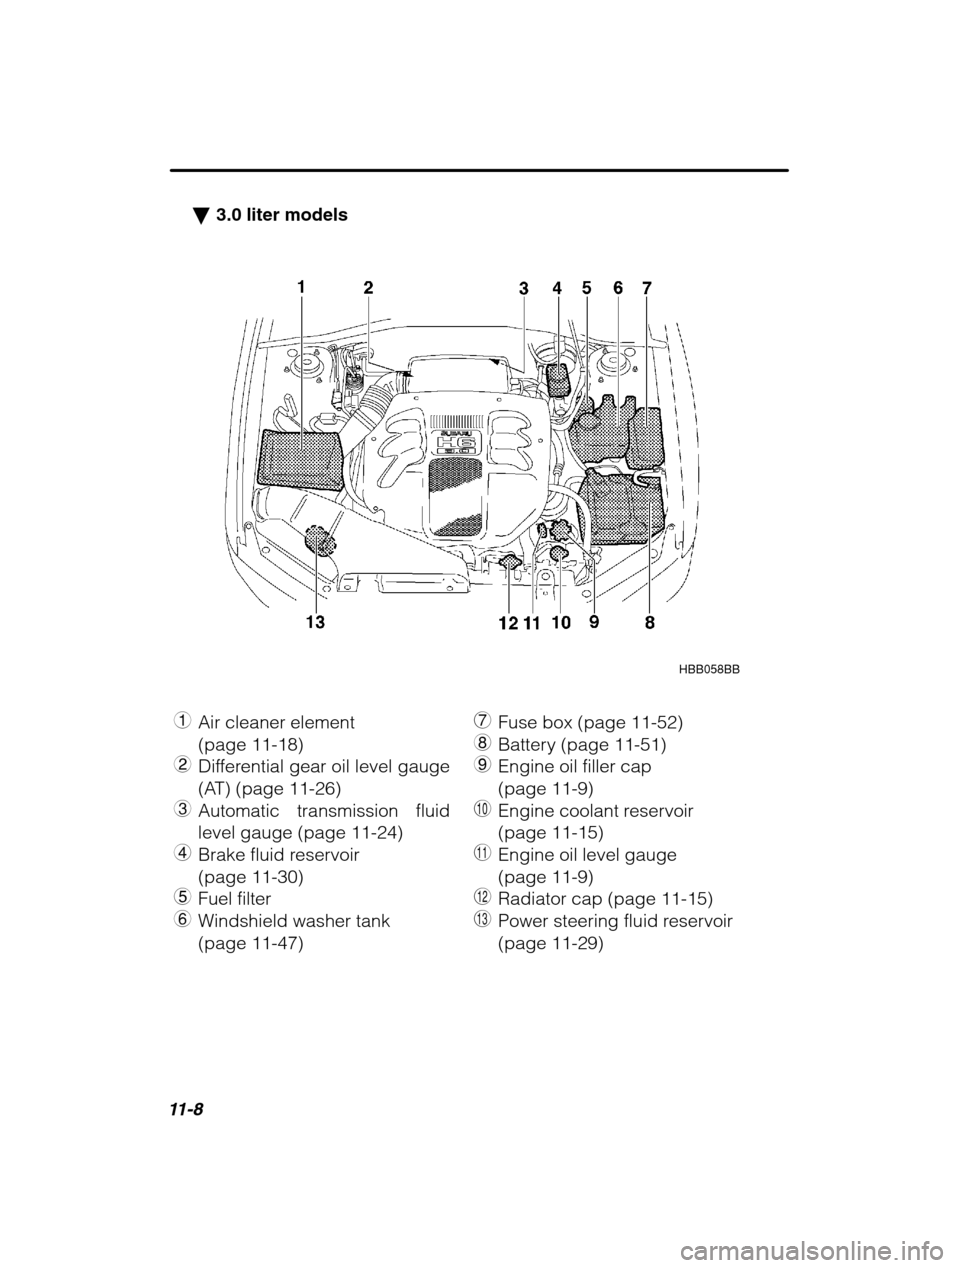 SUBARU OUTBACK 2002 3.G Owners Manual 11-8
�3.0 liter models
HBB058BB
1 Air cleaner element  (page 11-18)
2 Differential gear oil level gauge
(AT) (page 11-26)
3 Automatic transmission fluidlevel gauge (page 11-24)
4 Brake fluid reservoir